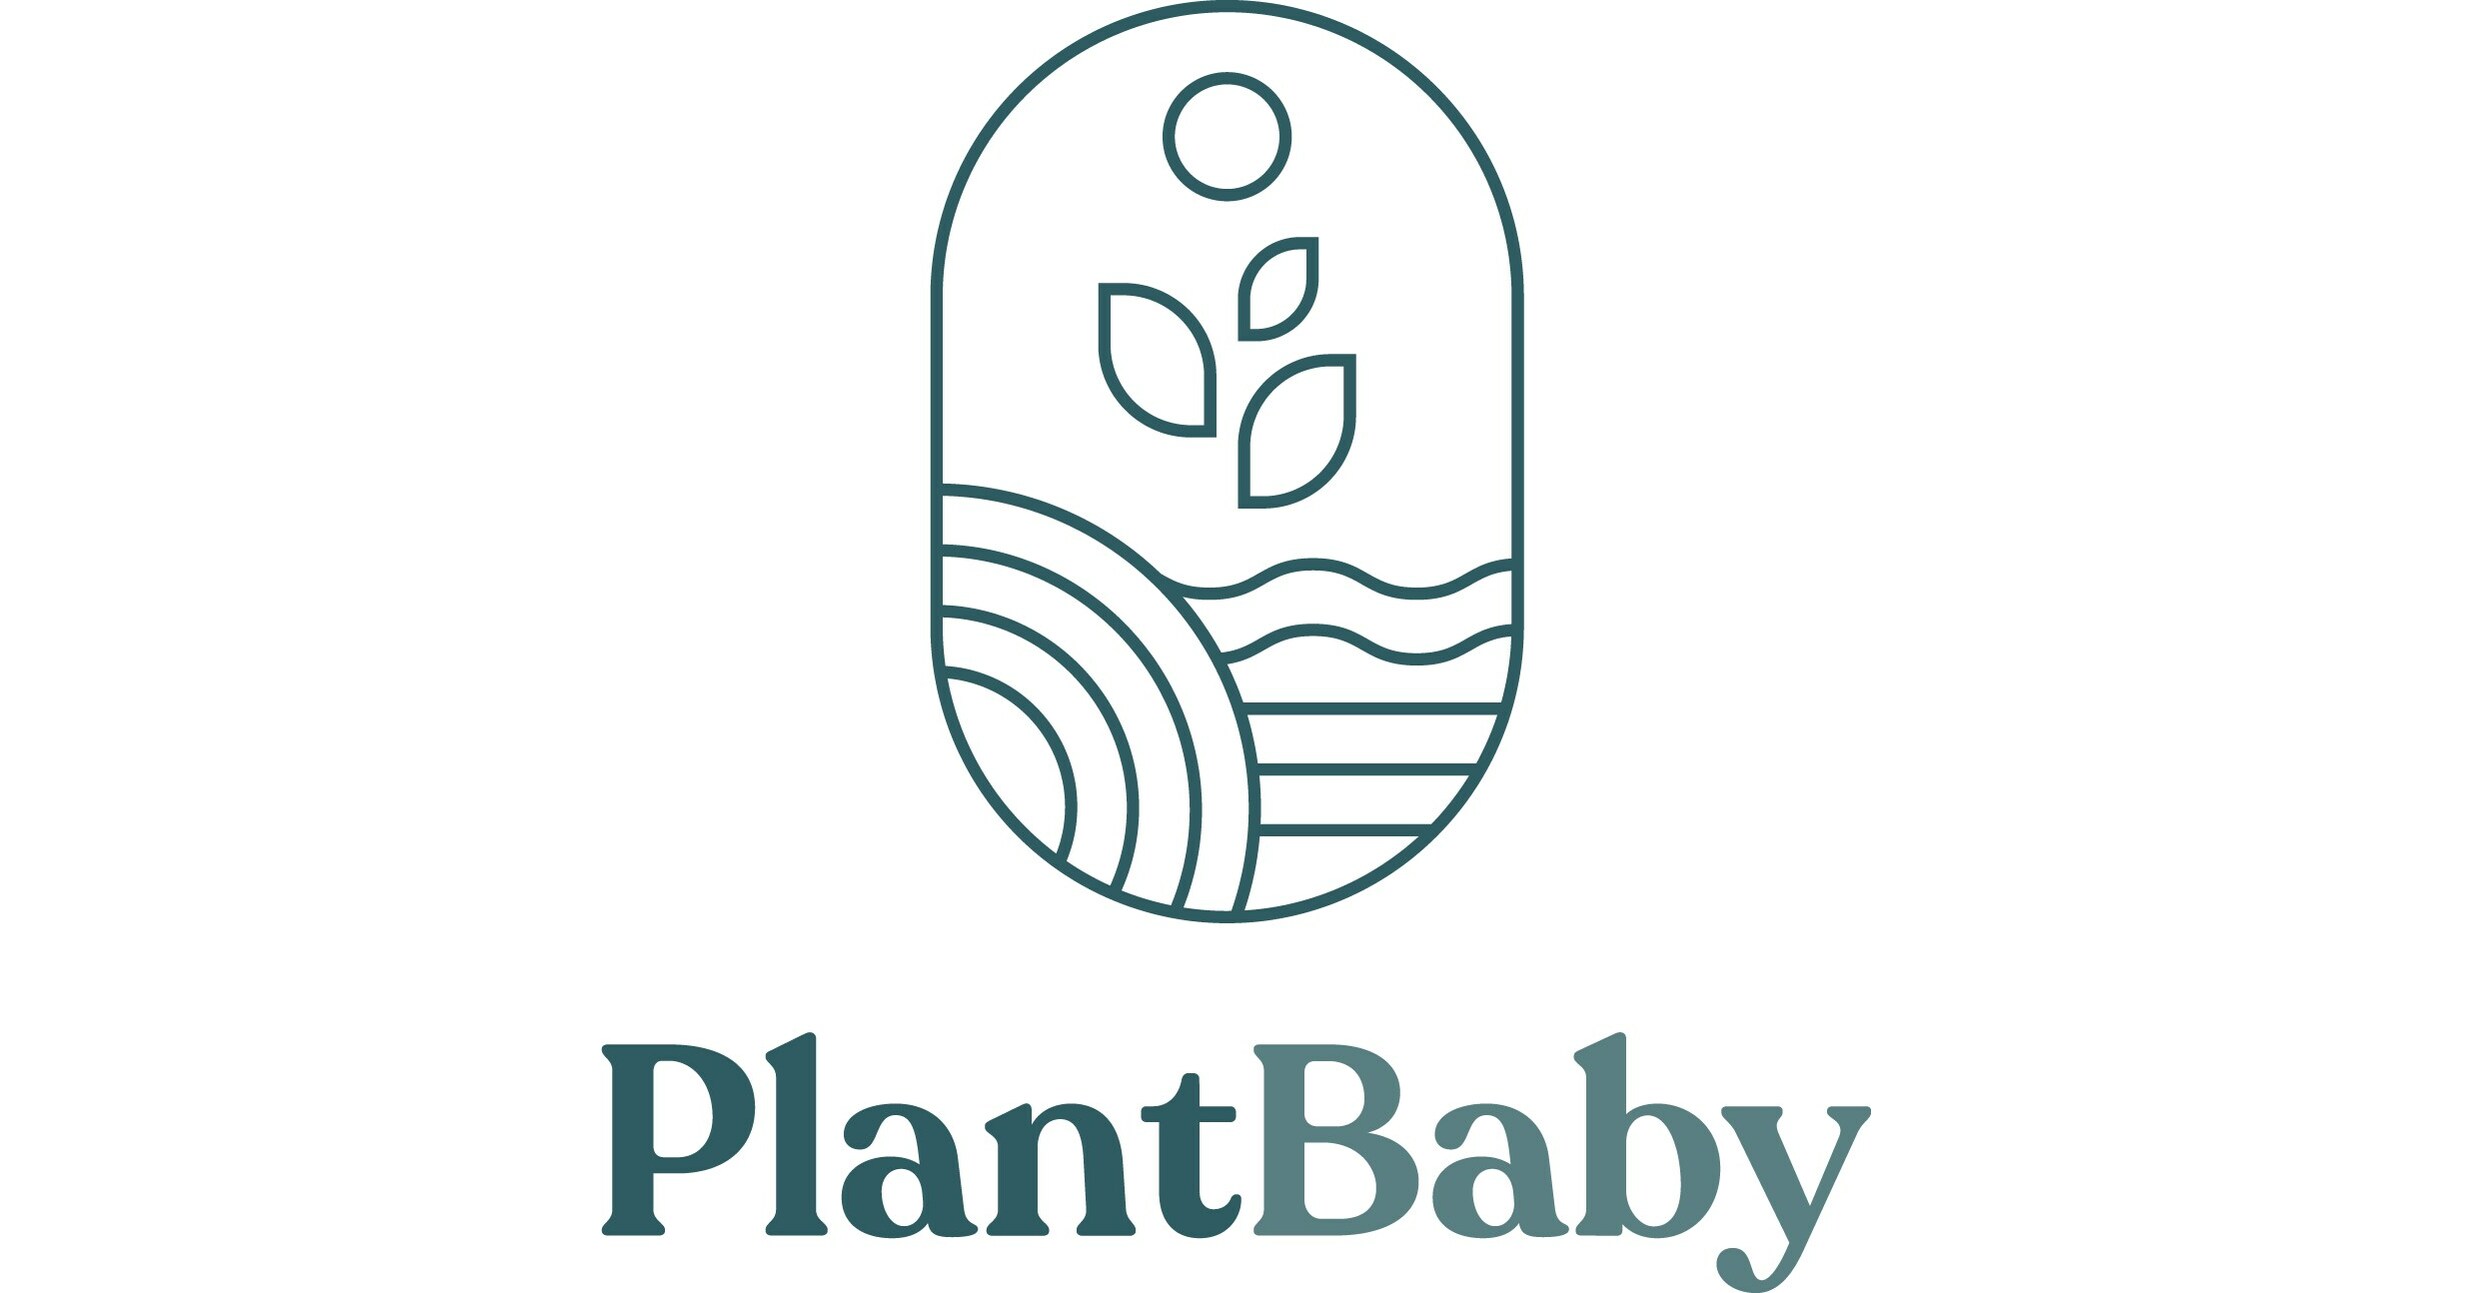 PlantBaby Shows Strong Growth as It Enters Third Year and Makes Way to Go  International